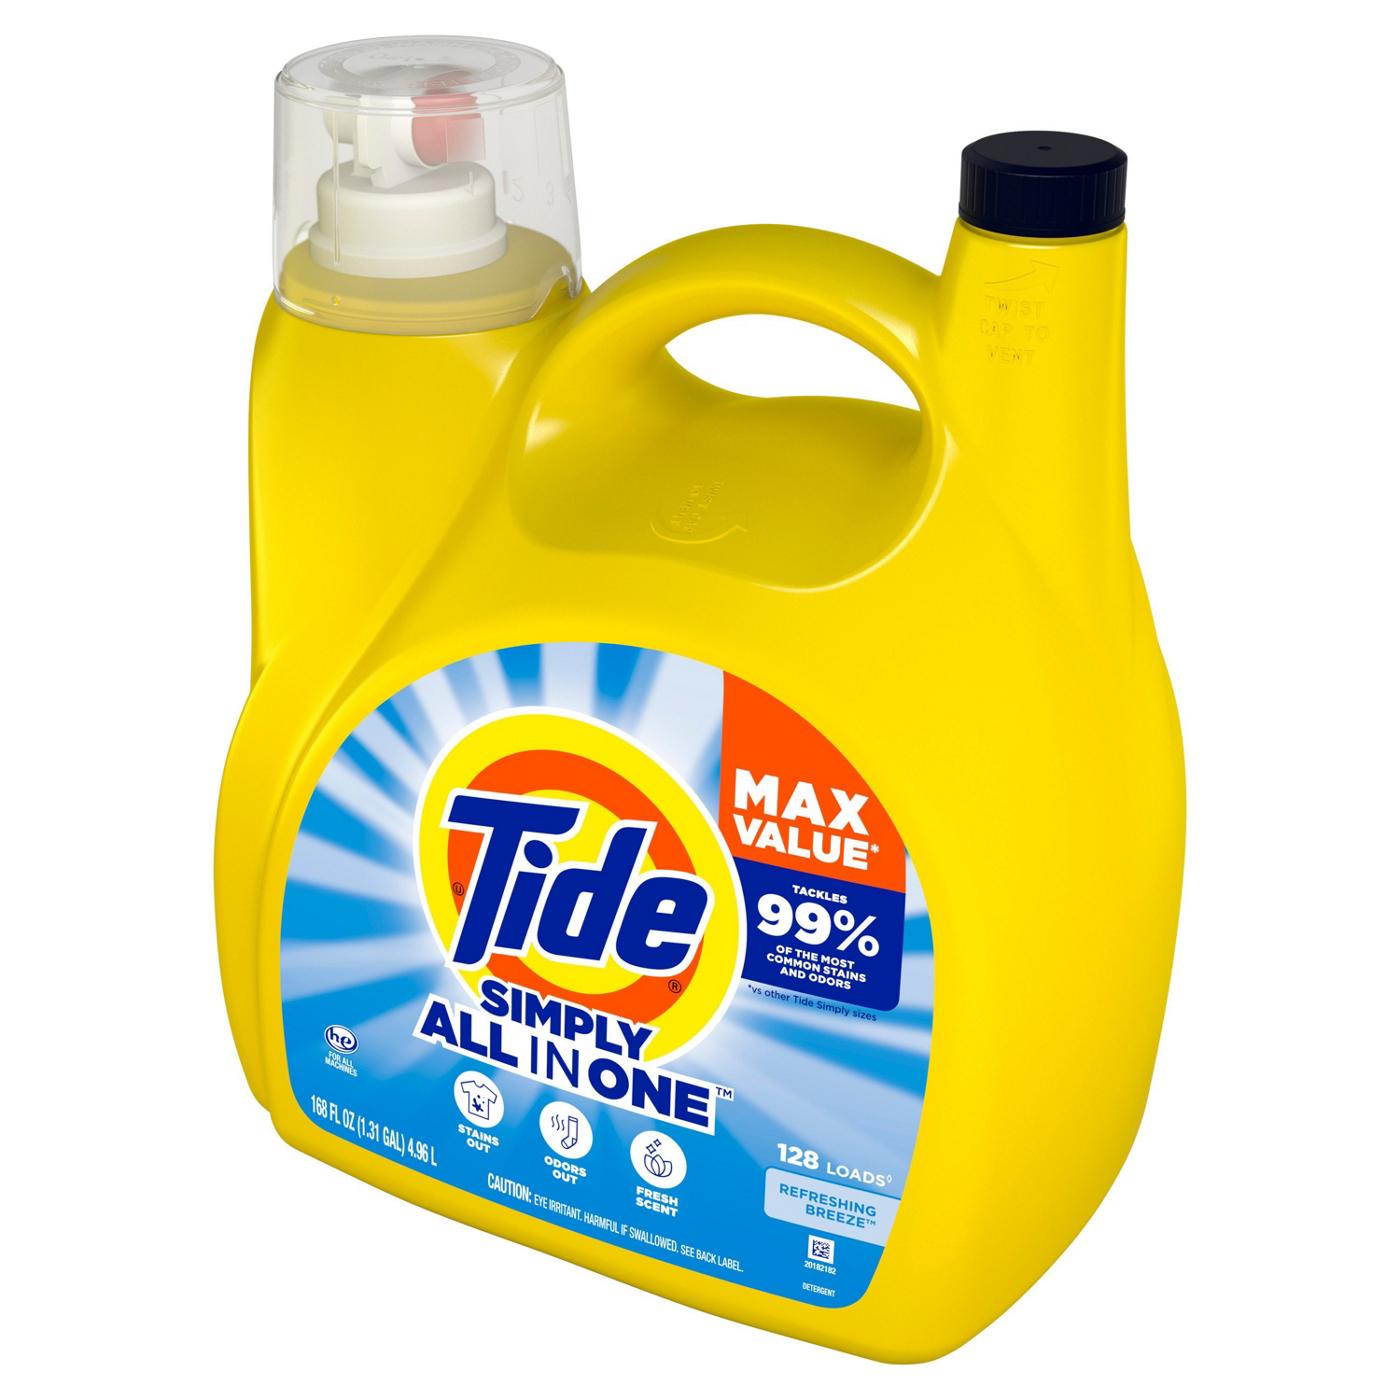 Tide Simply All In One Refreshing Breeze Liquid Laundry Detergent 128 Loads; image 8 of 9